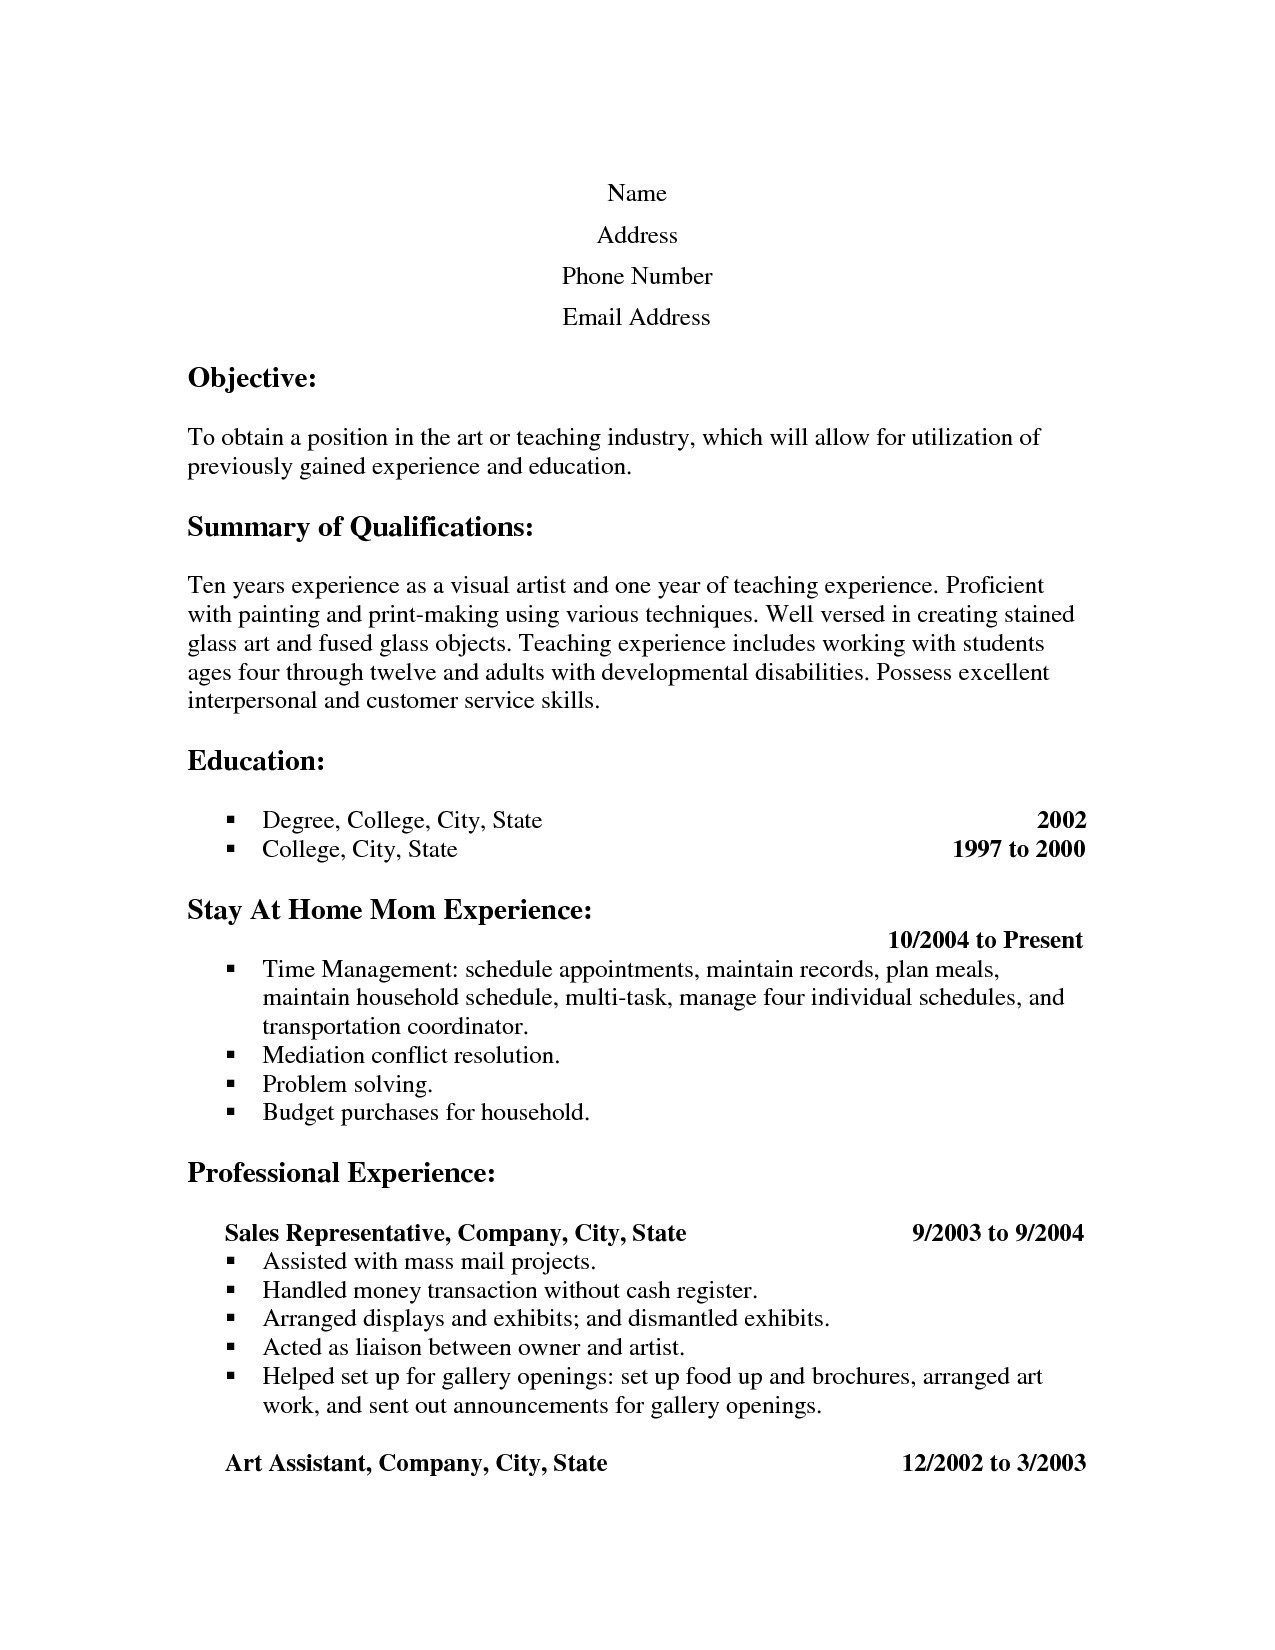 resume examples for stay at home momsml